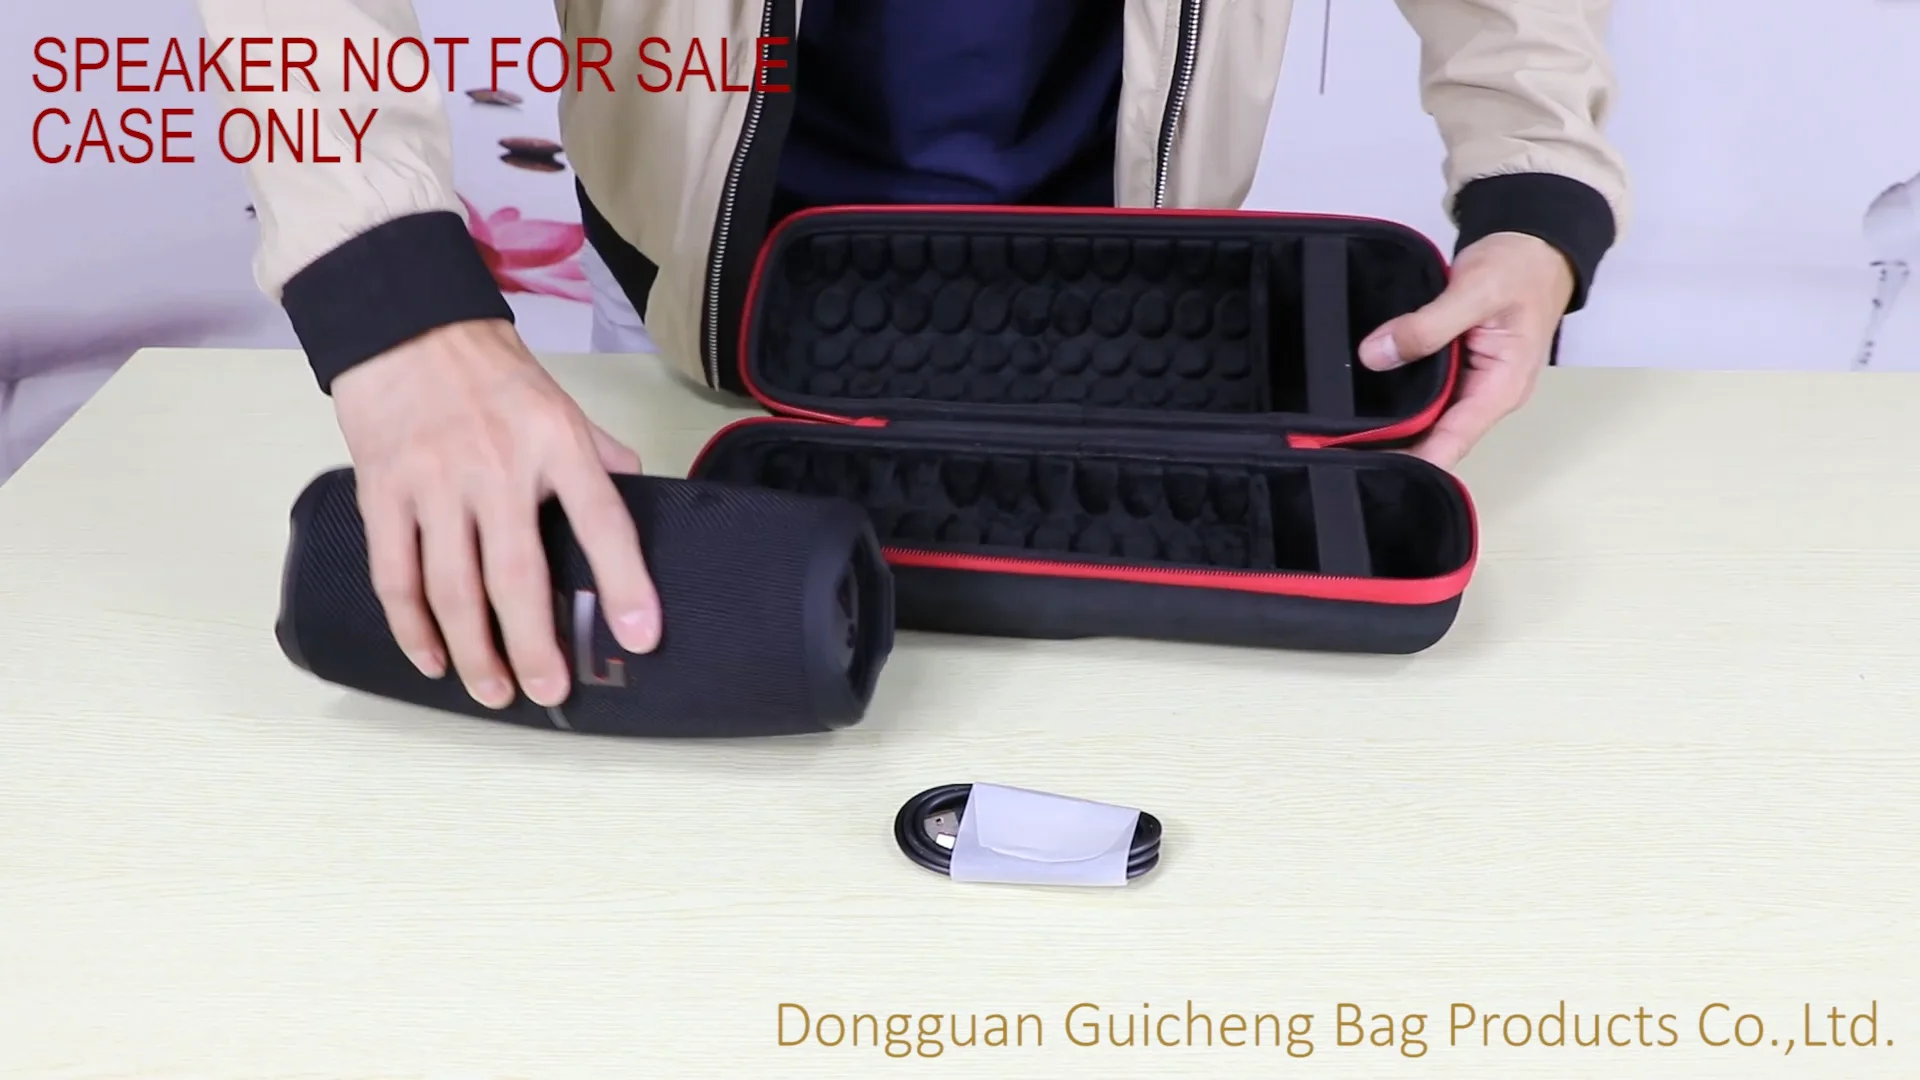 Fall guide spear Wholesale Hard Travel Case for JBL Charge 4/ Charge 5 Waterproof Bluetooth  Speaker. Carrying Storage Bag Fits Charger and USB Cable From m.alibaba.com